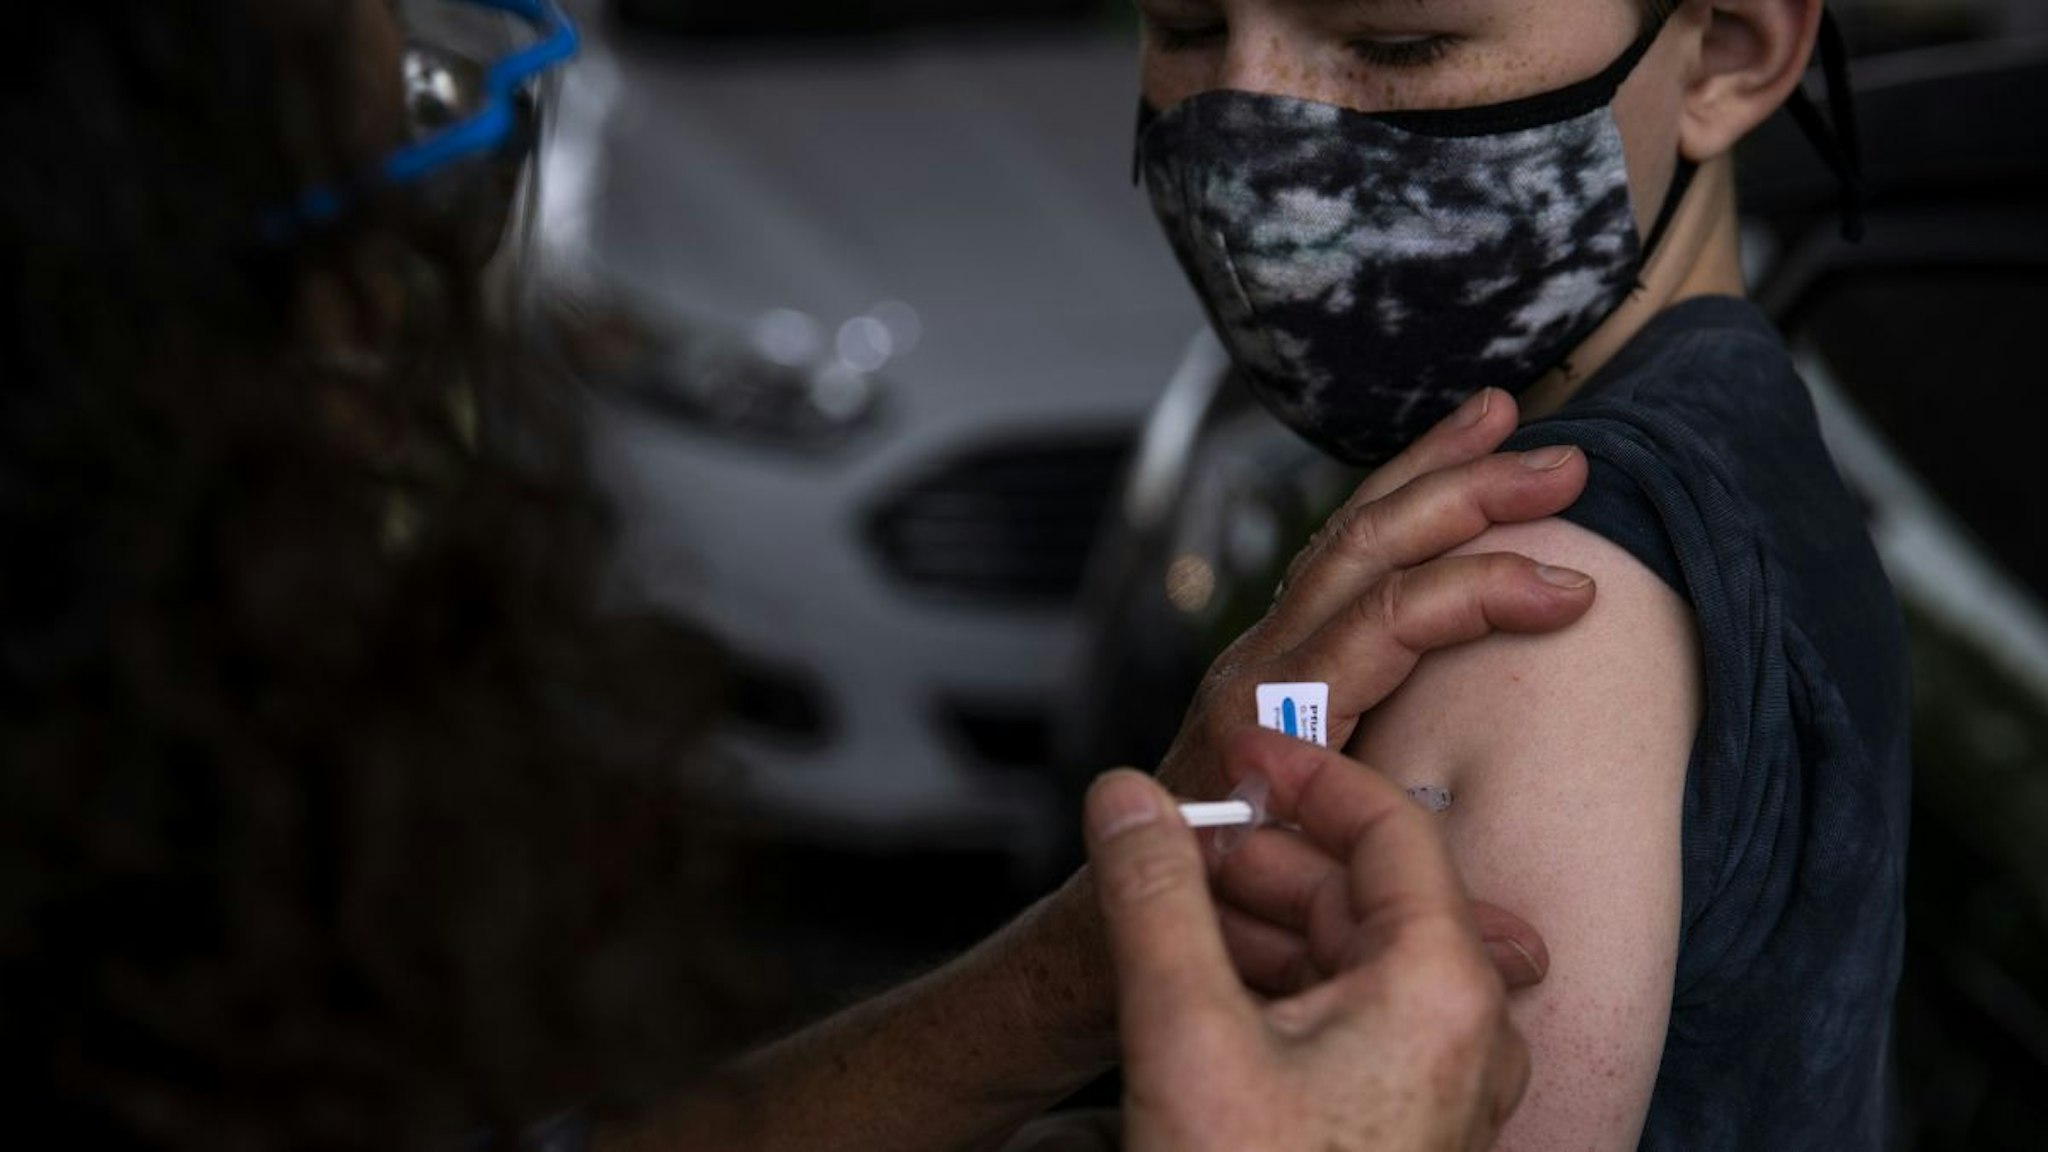 A healthcare worker administers a dose of the Pfizer-BioNTech Covid-19 vaccine to a teenager at the Oregon Health & Science University (OHSU) mass vaccination site at Portland International Airport (PDX) in Portland, Oregon, U.S., on Monday, May 17, 2021.